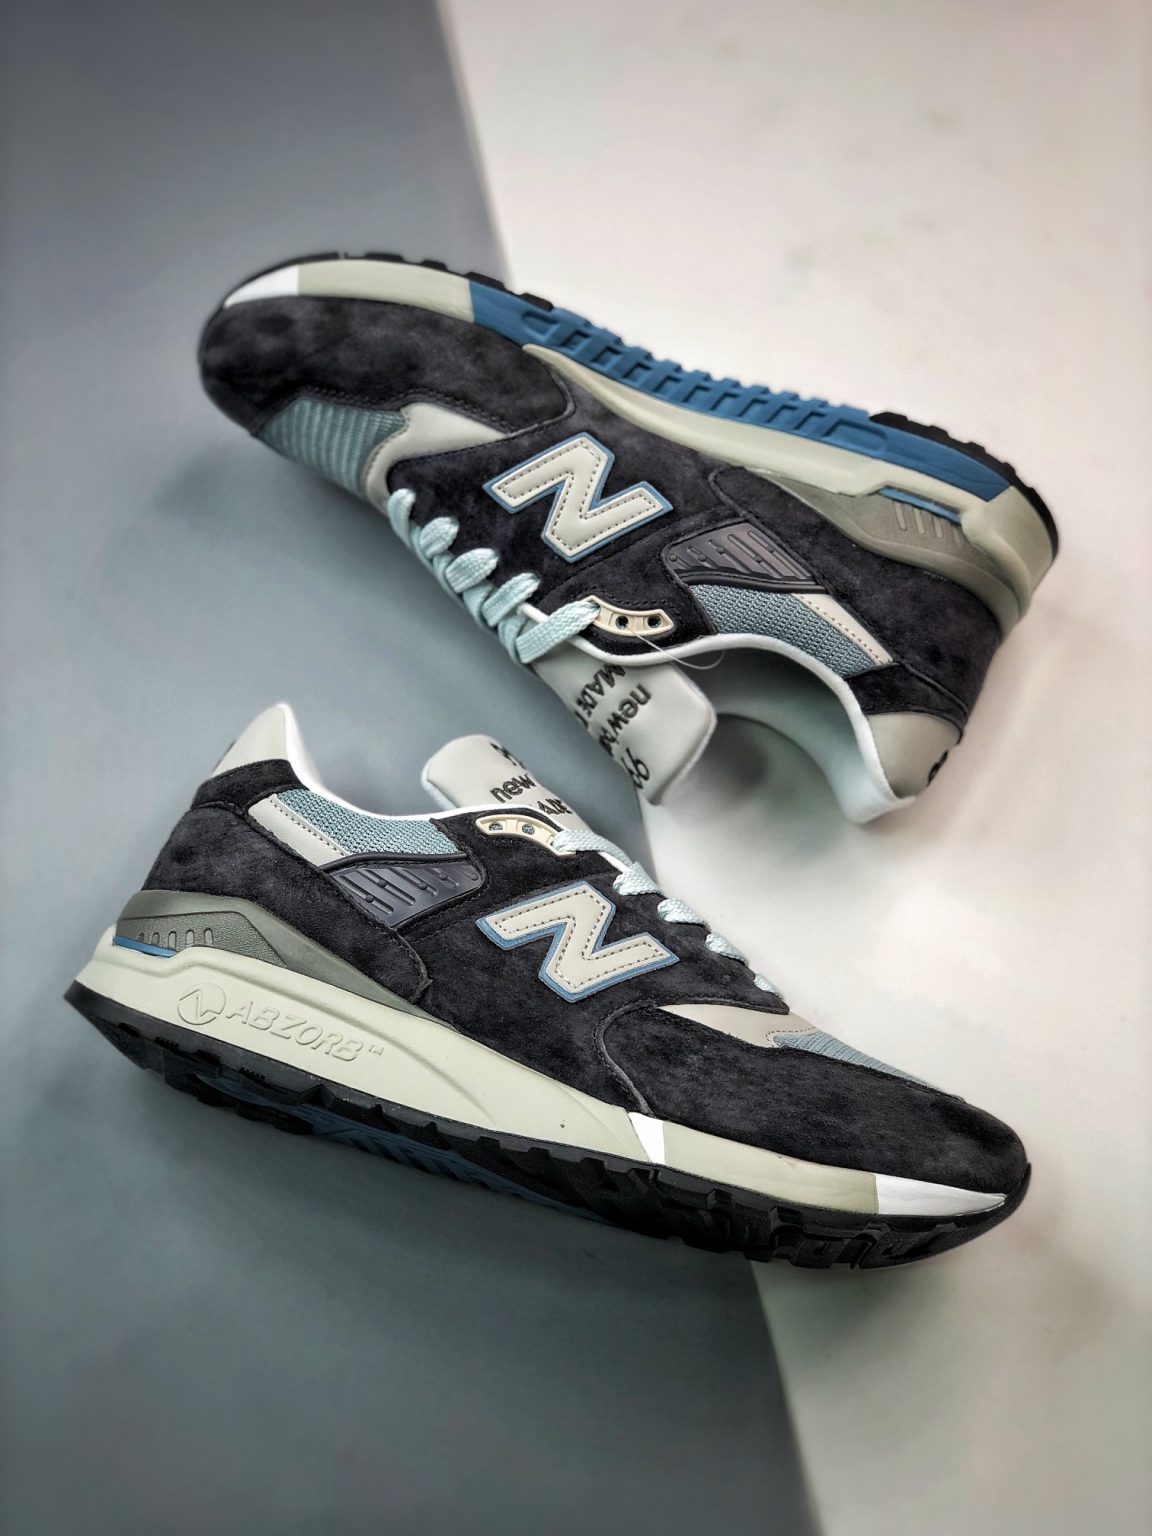 Kith x New Balance 998CL “Steel Blue” M998KT For Sale – Sneaker Hello